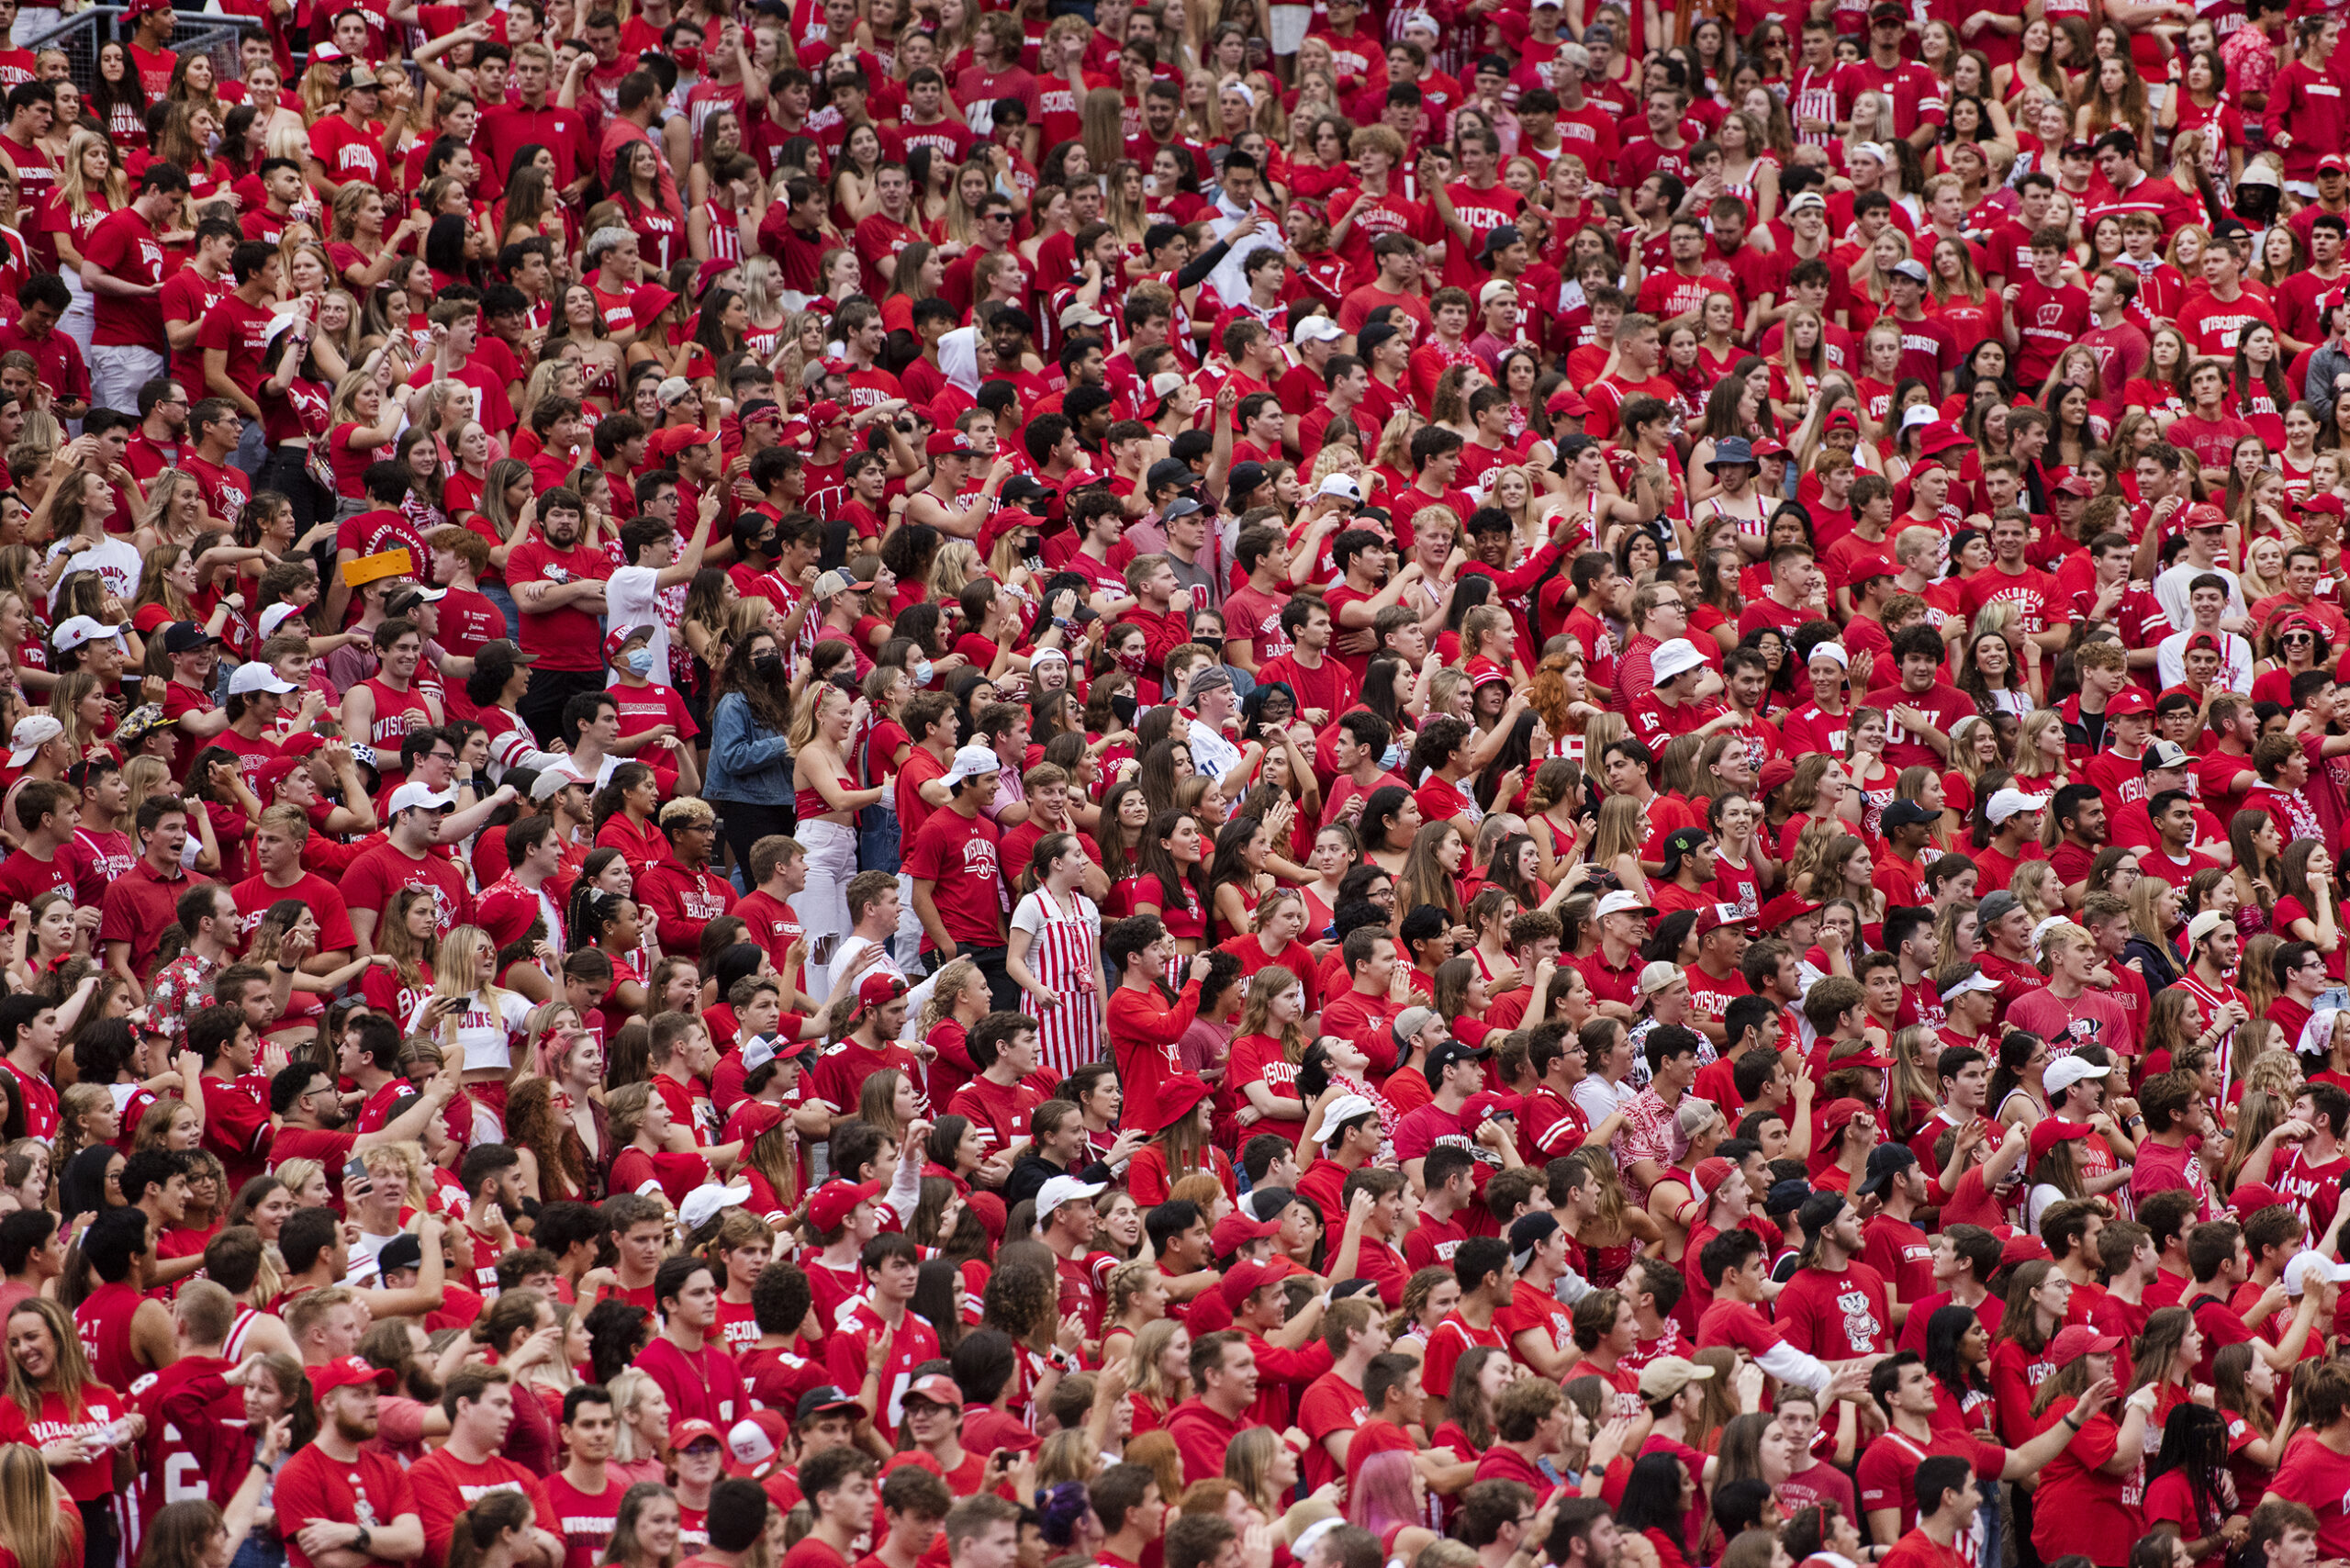 A sea of fans wear red in Camp Randall.